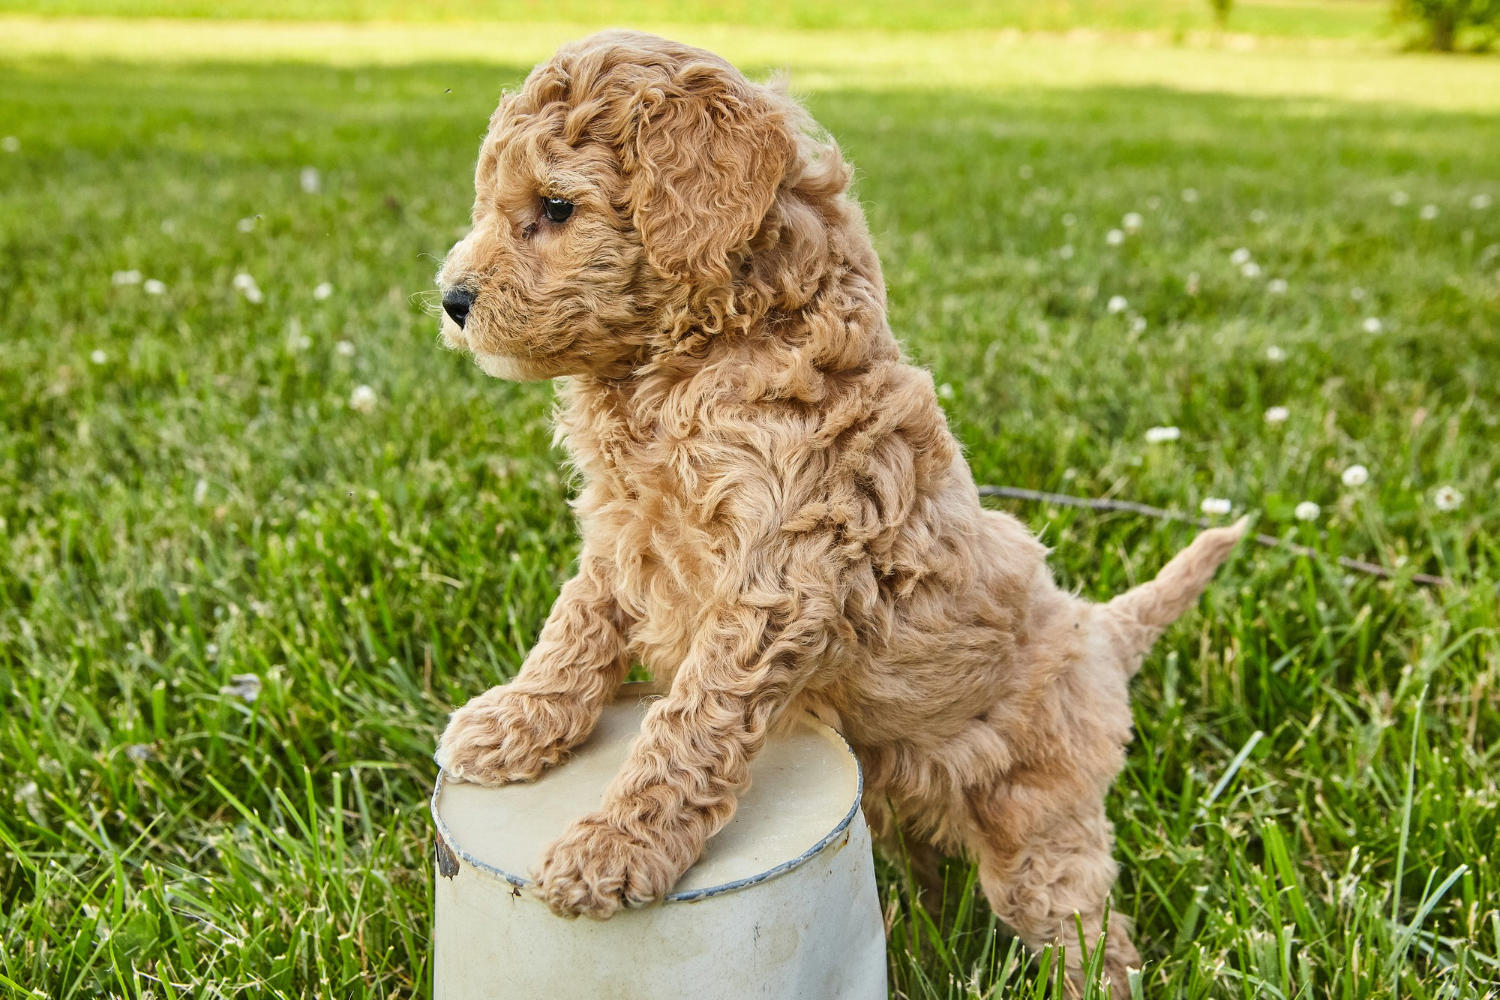 "How Much Food Should a Goldendoodle Puppy Eat Each Day? An Essential Guide to Feeding Your Dog"